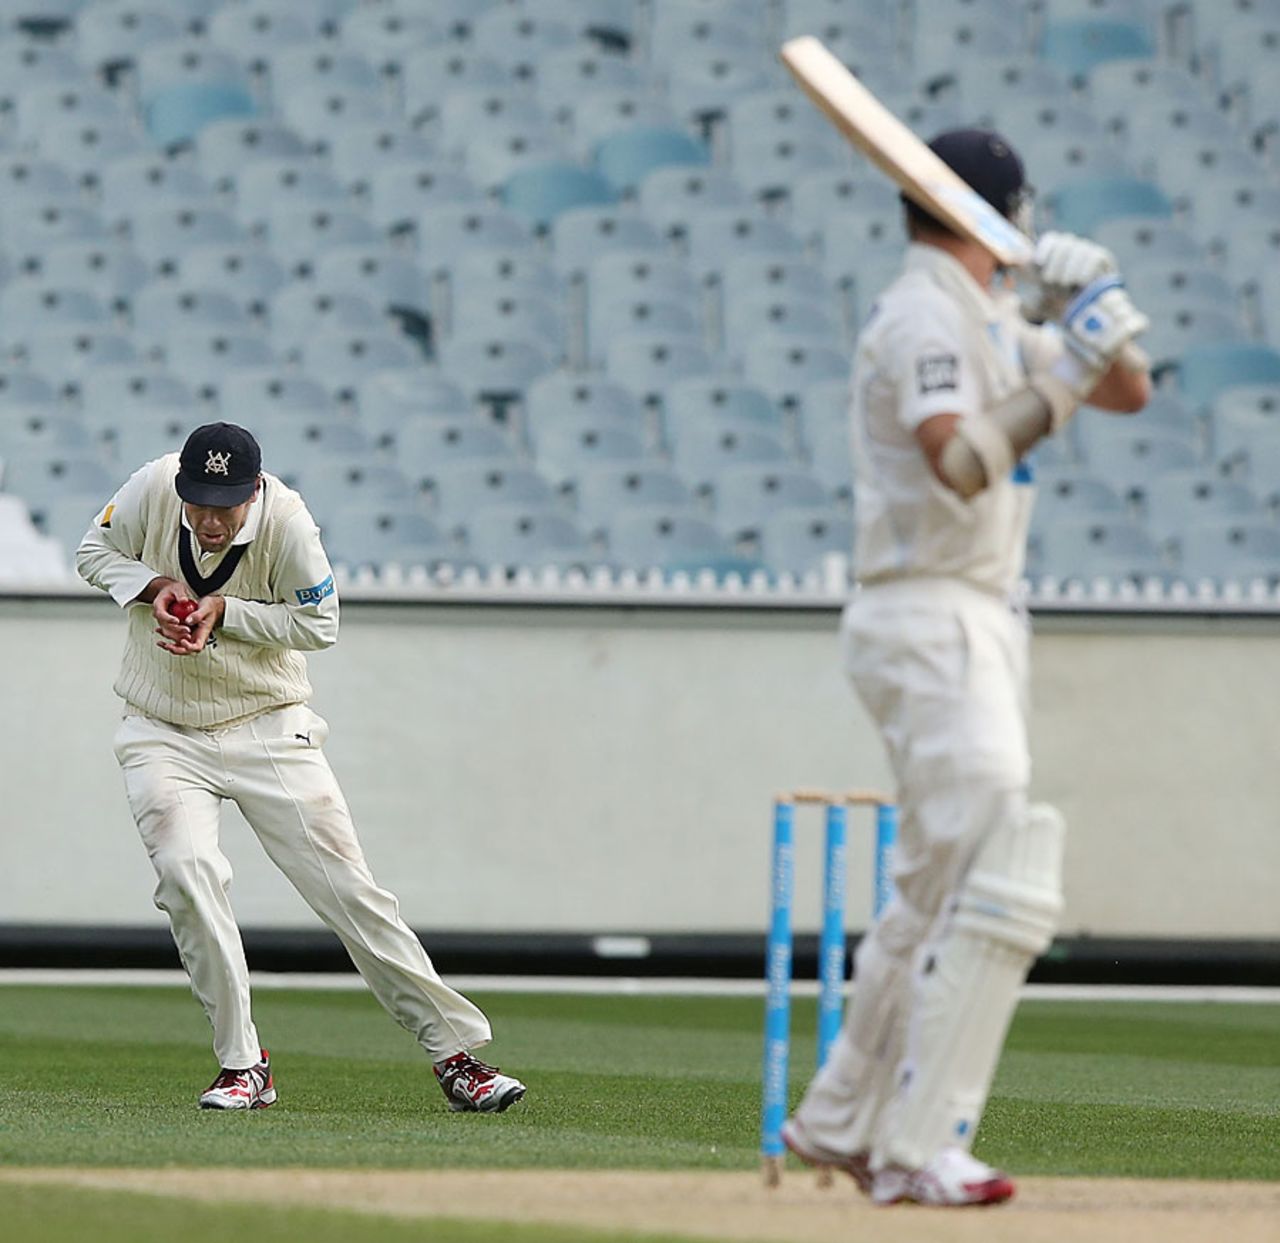 Rob Quiney pouches a catch at slip, Victoria v New South Wales, Sheffield Shield, Melbourne, 2nd day, November 7, 2013